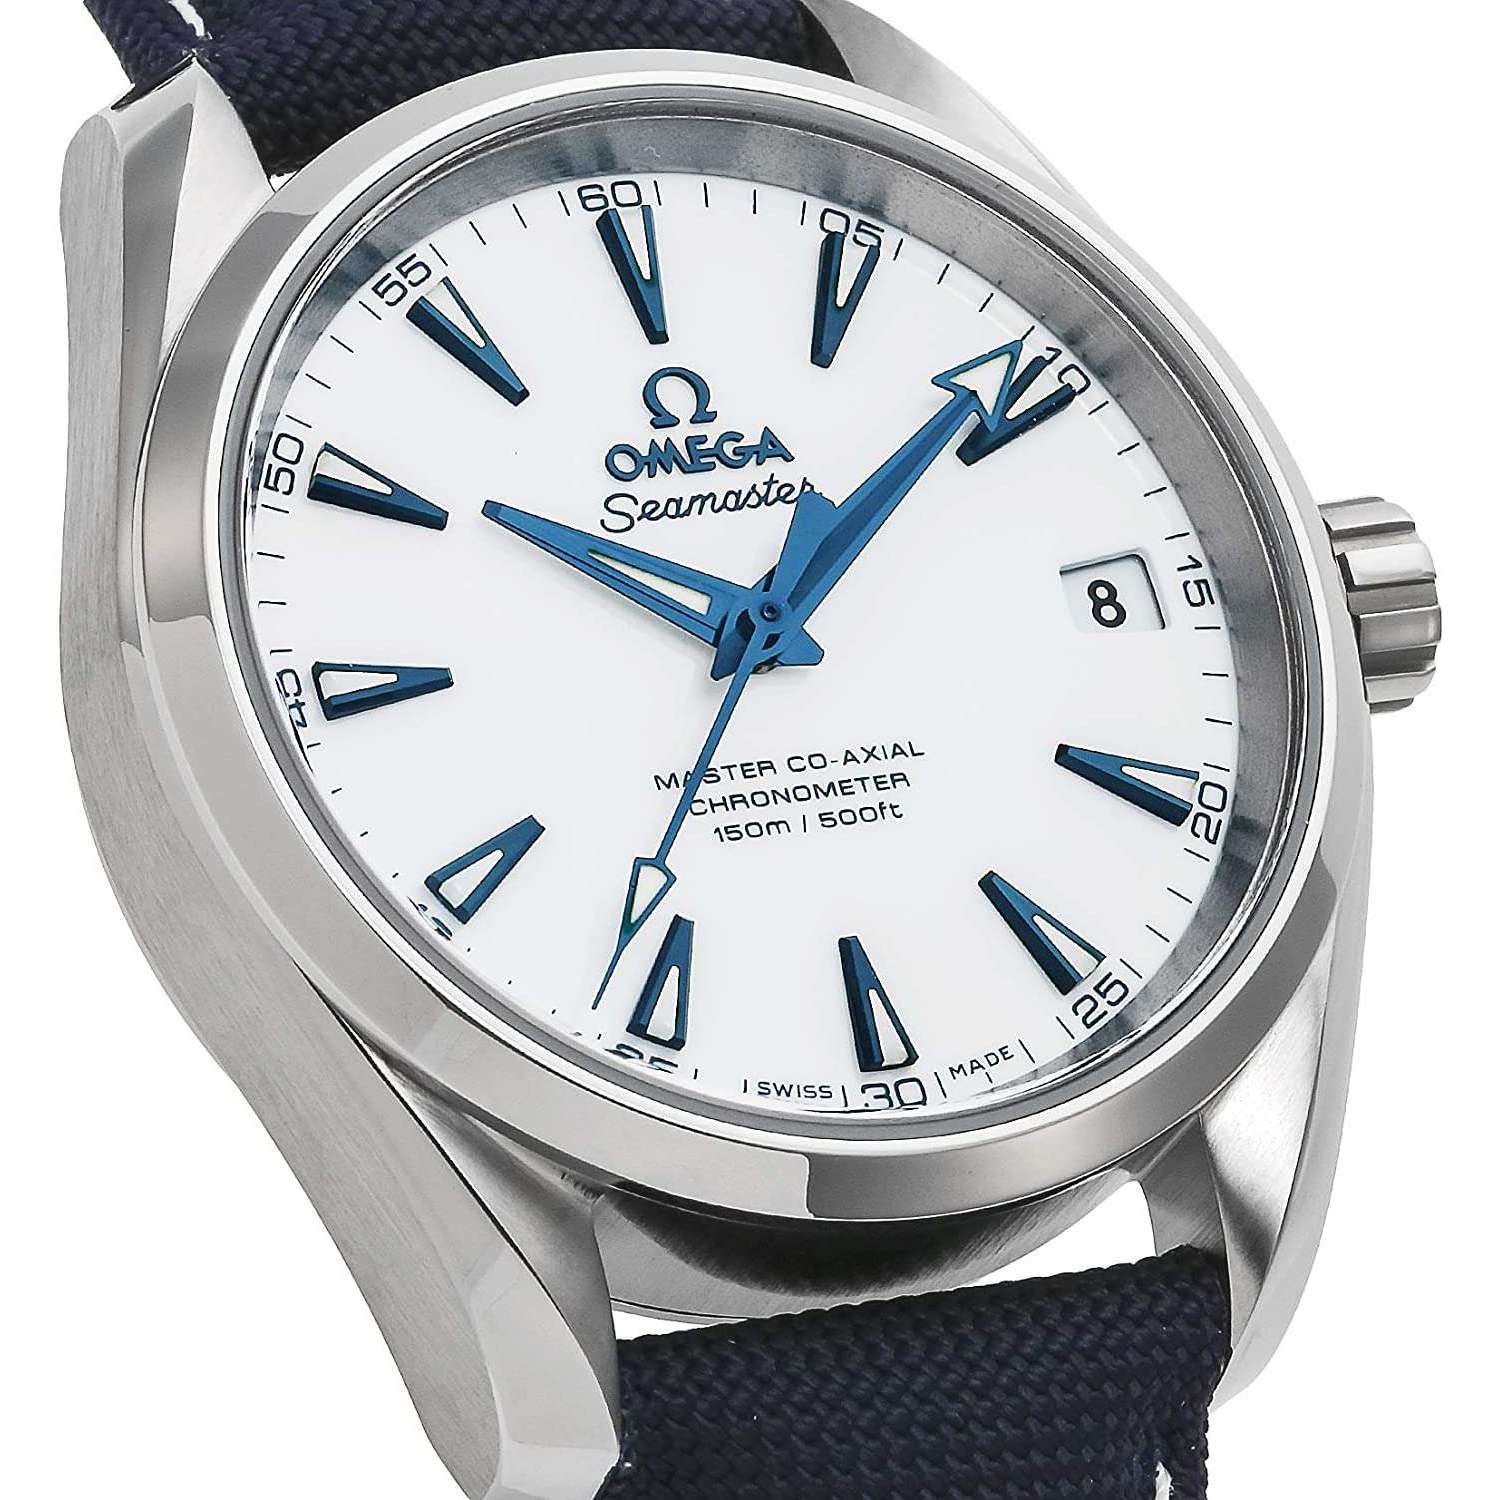 OMEGA SEAMASTER MASTER CO-AXIAL CHRONOMETER 37 MM MEN WATCH 231.92.39.21.04.001 - ROOK JAPAN